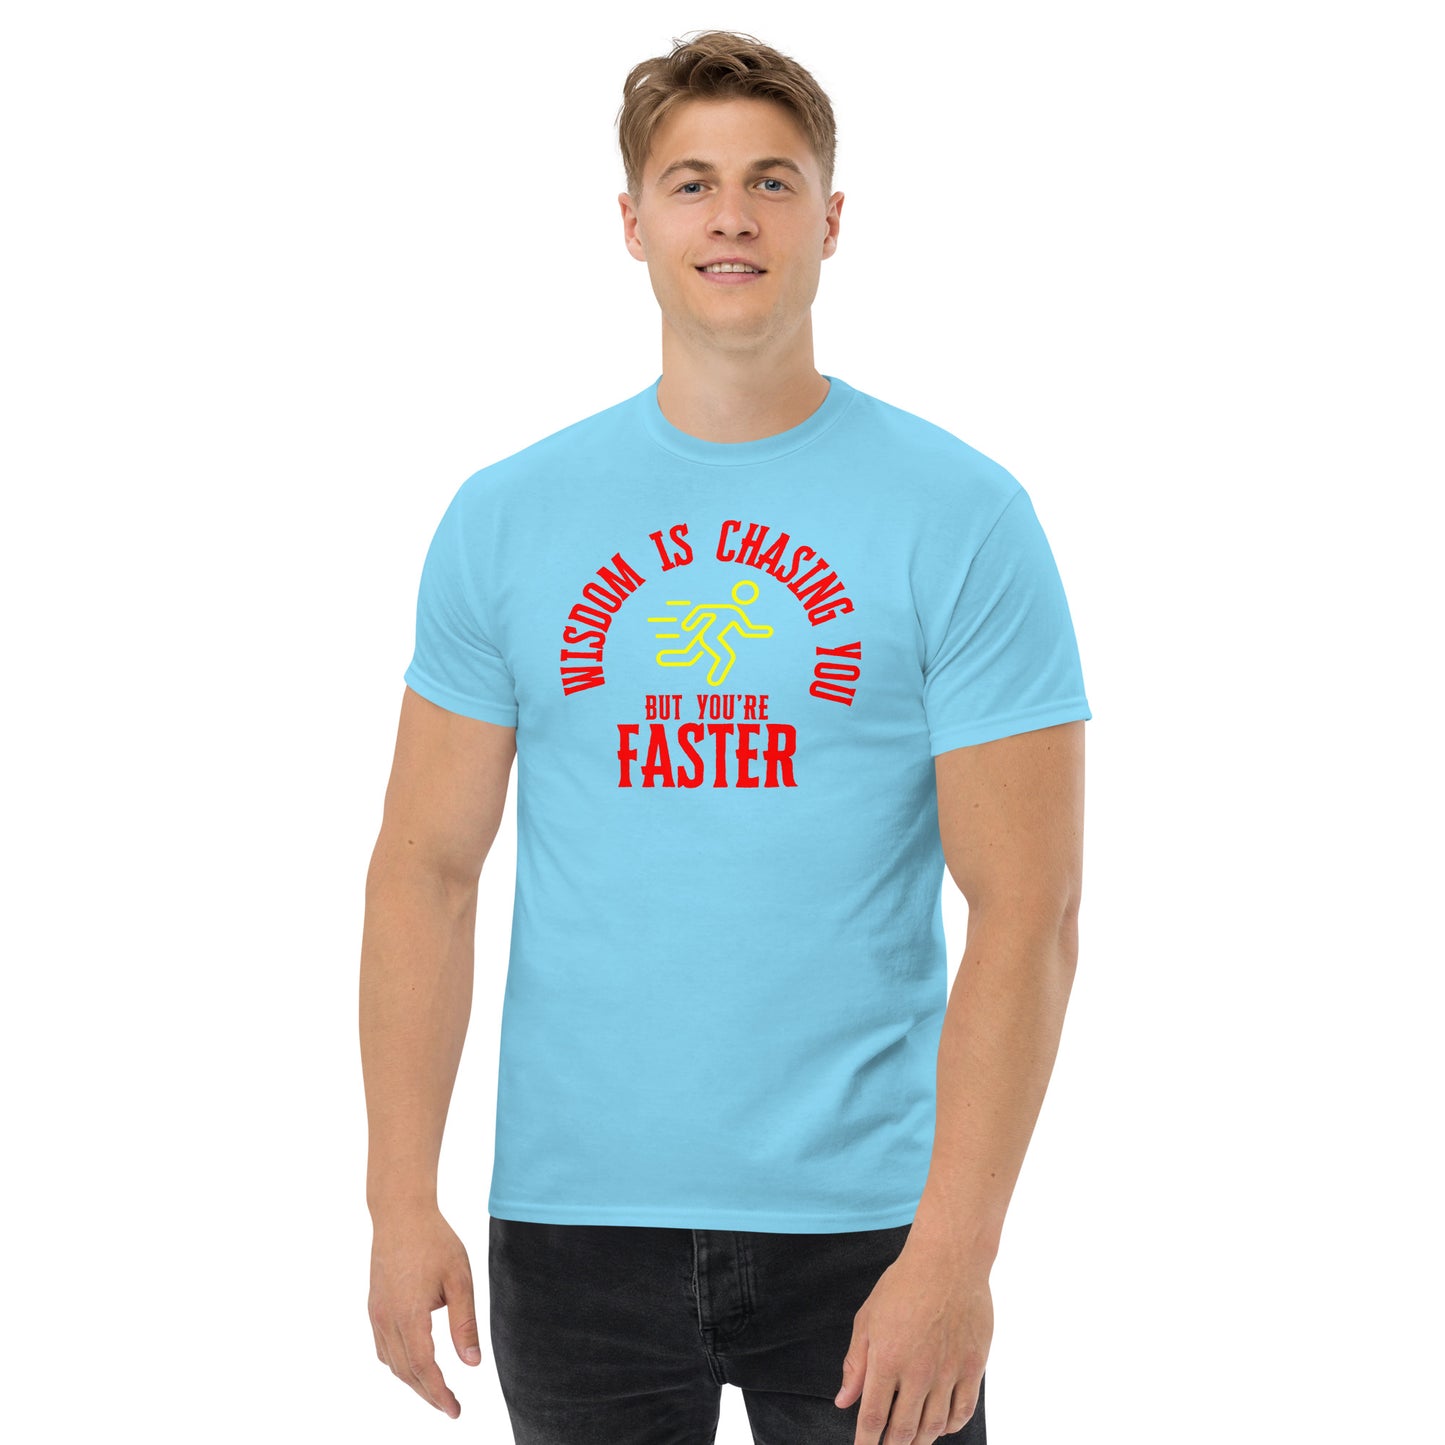 WISDOM IS CHASING YOU BUT YOU'RE FASTER Men's classic tee